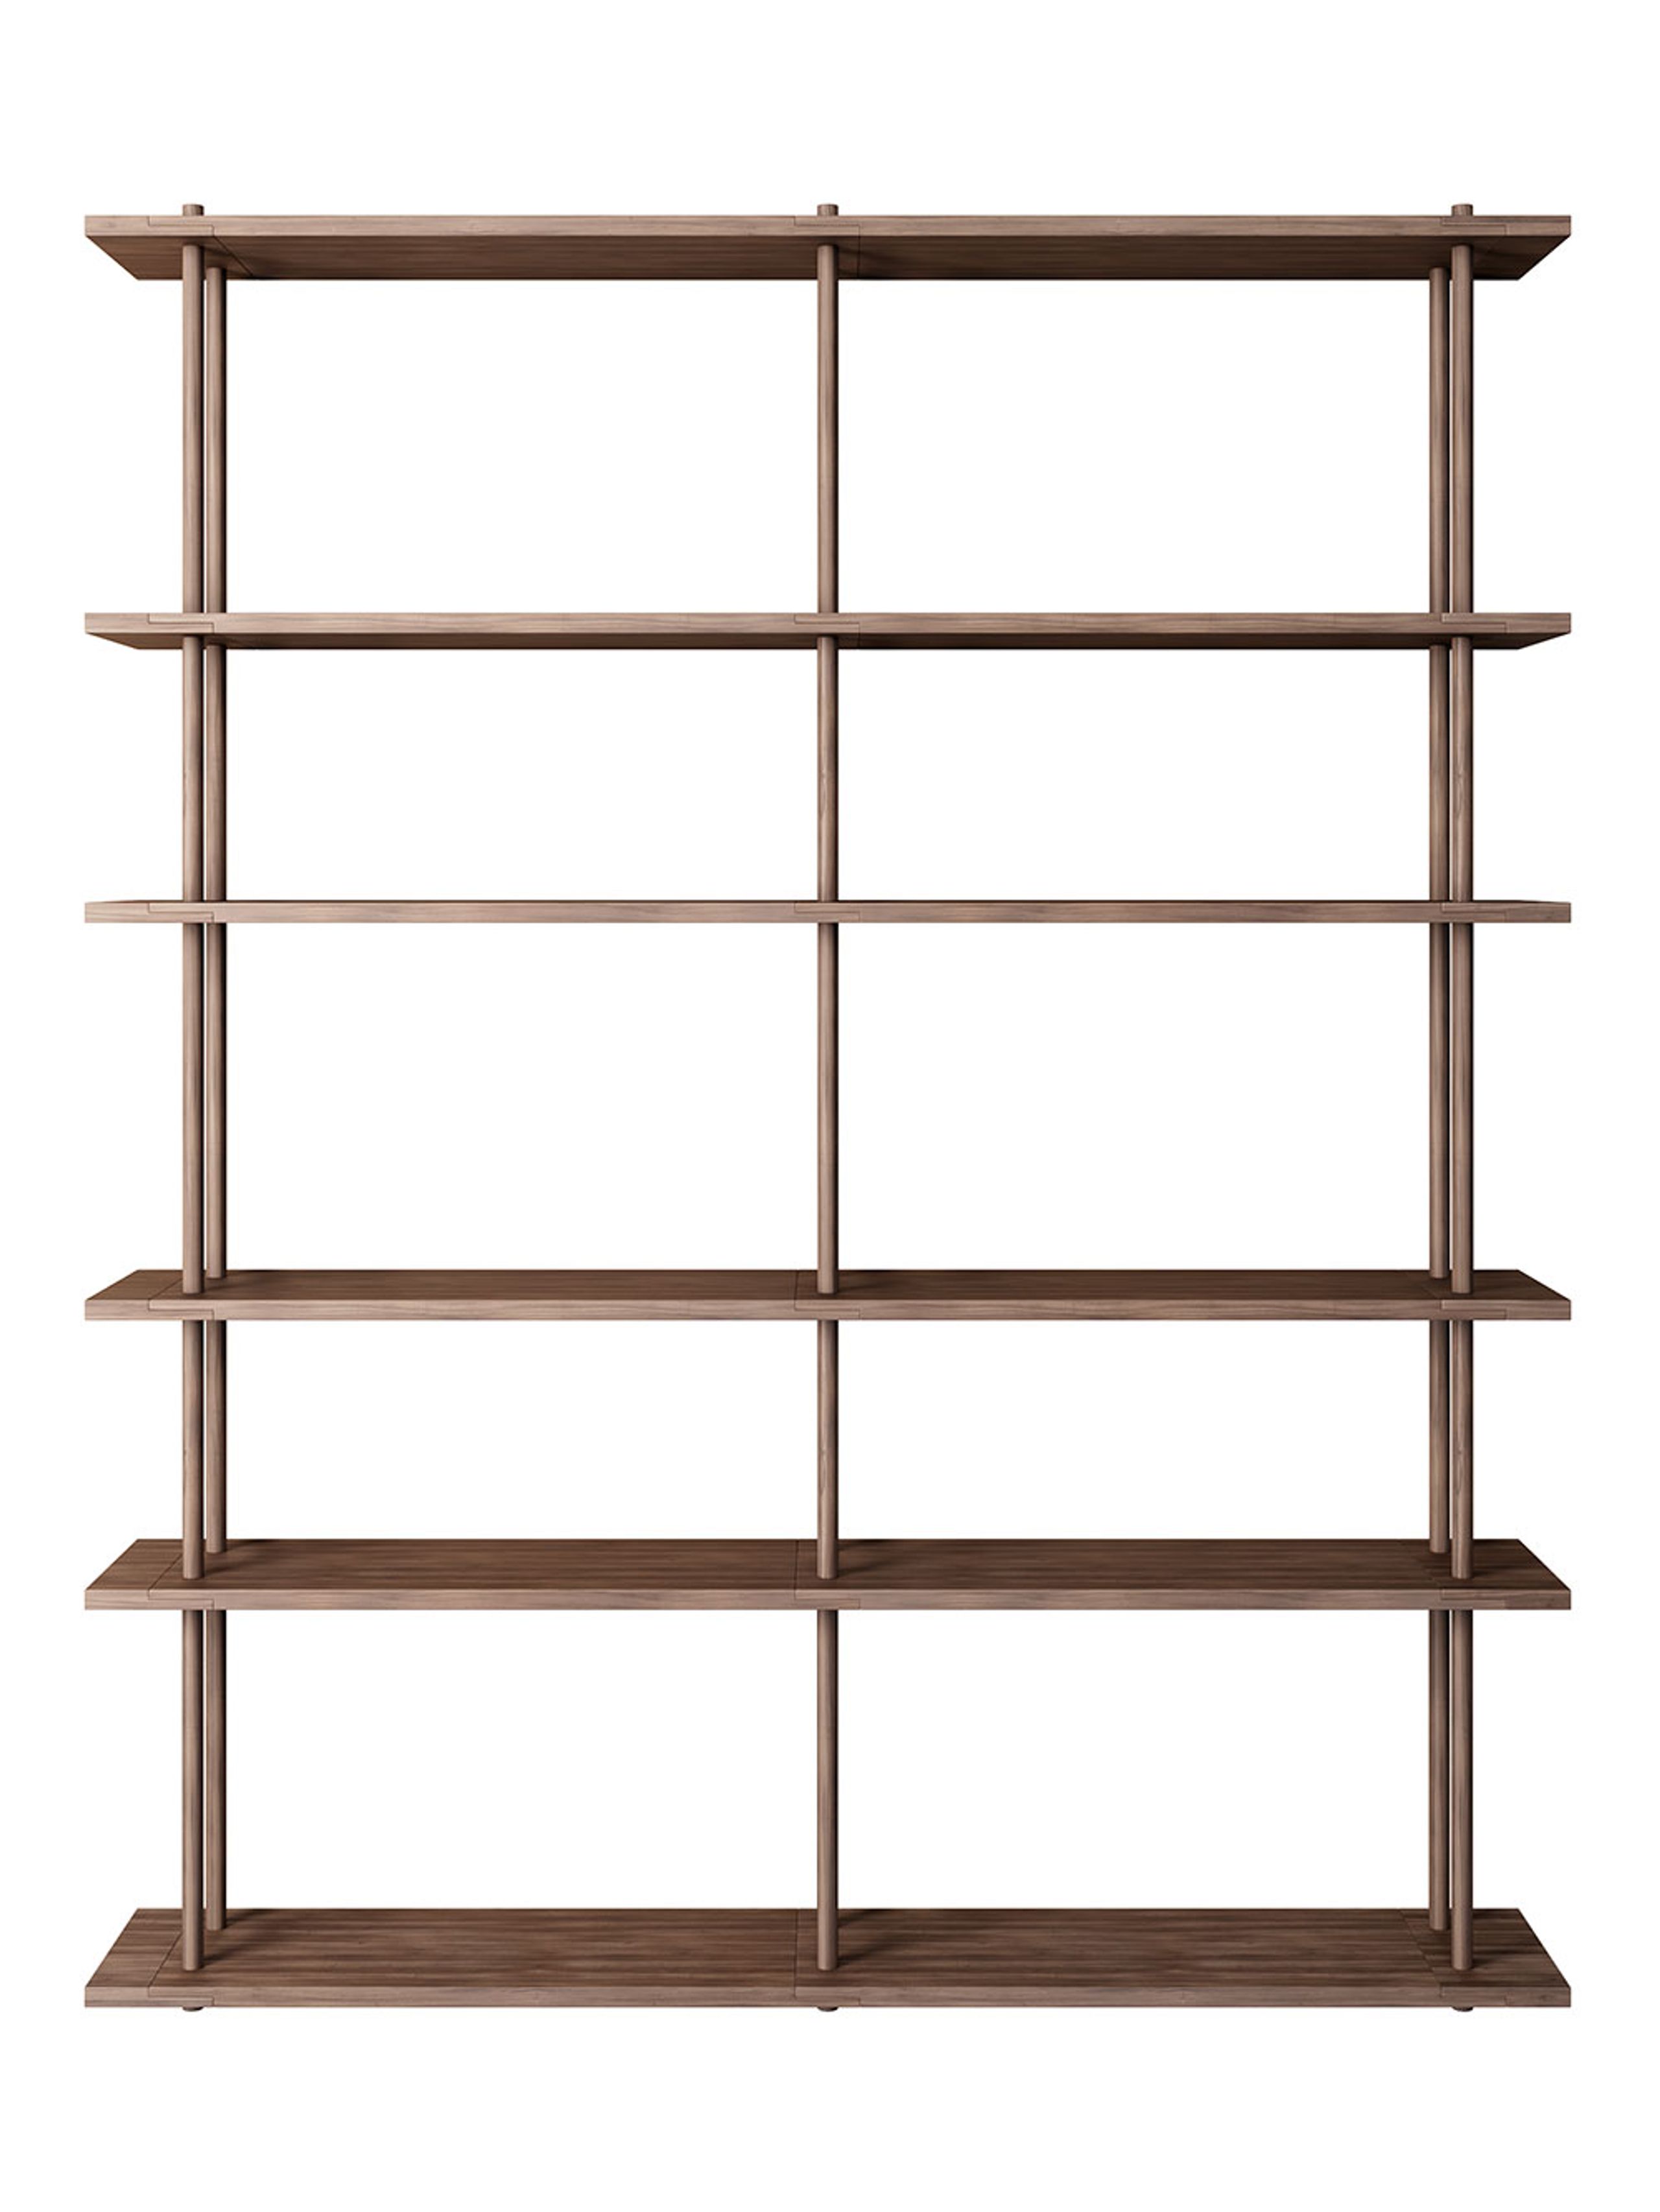 Fogia - Reol - Bond Configuration / W206 - Lacquered Walnut